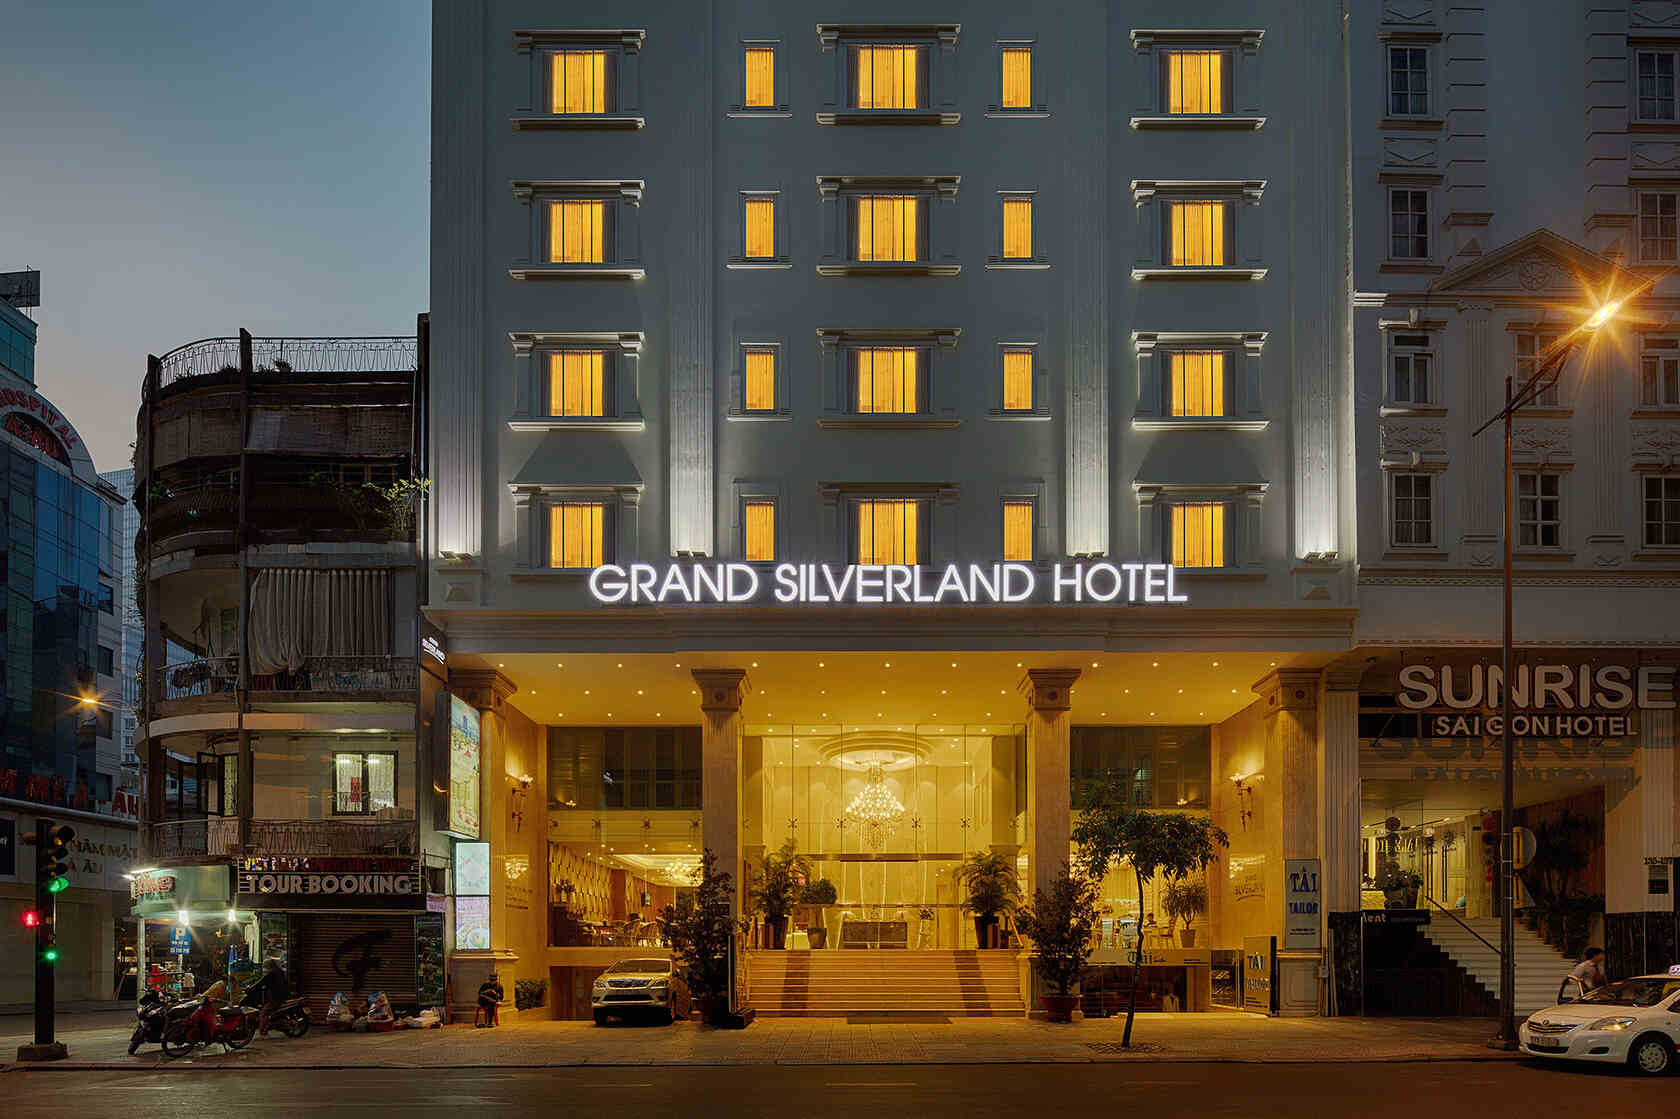 The descendant of the once famous Grand Silverland Hotel